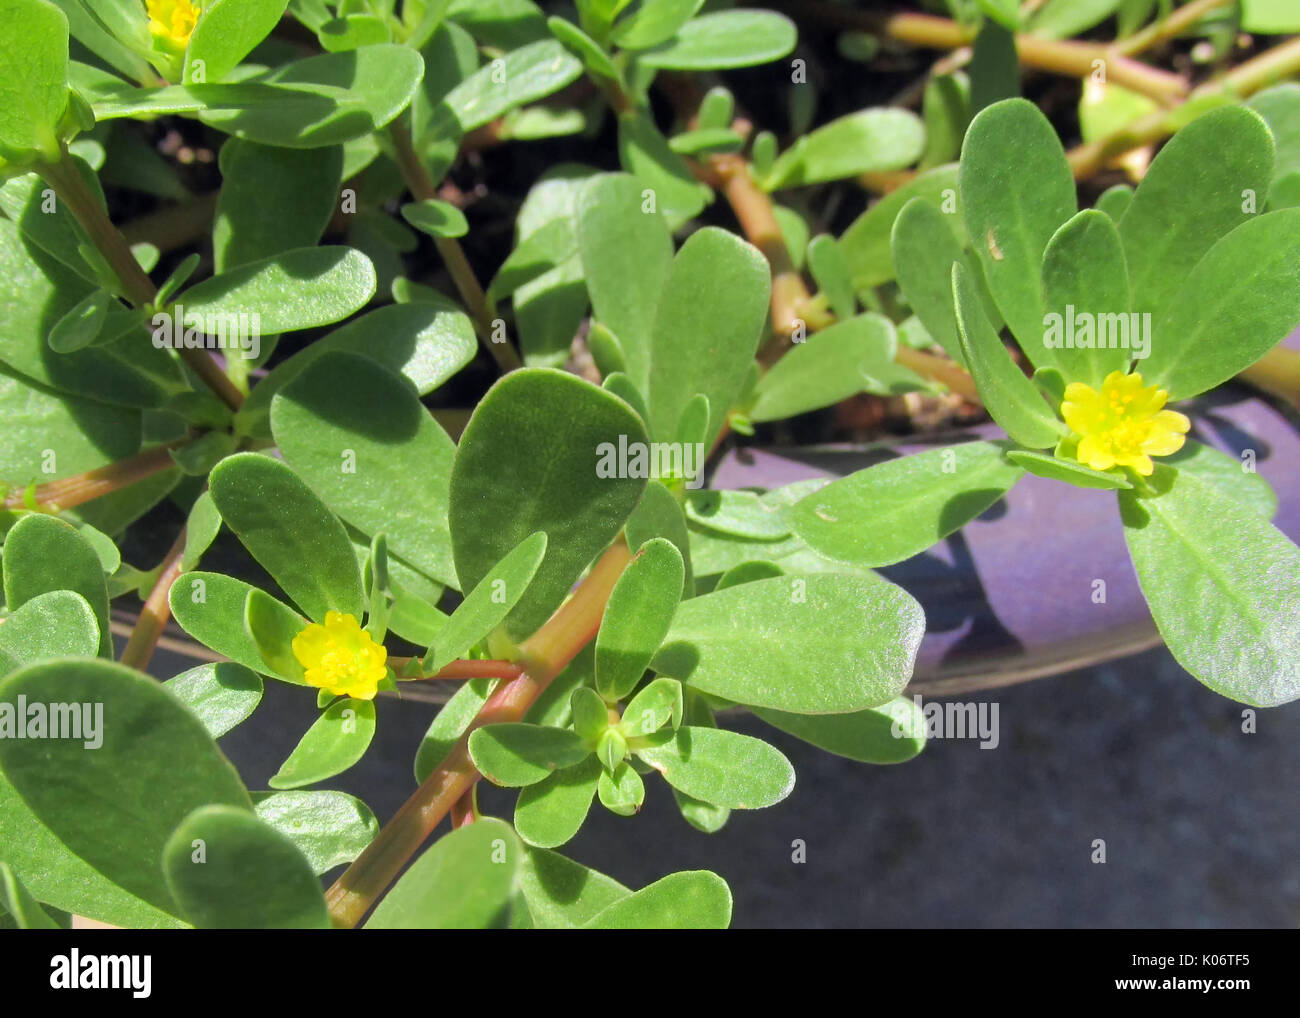 A close up view of Common Purslane (Portulaca oleracea) focusing on the leaves and small yellow flowers. Stock Photo